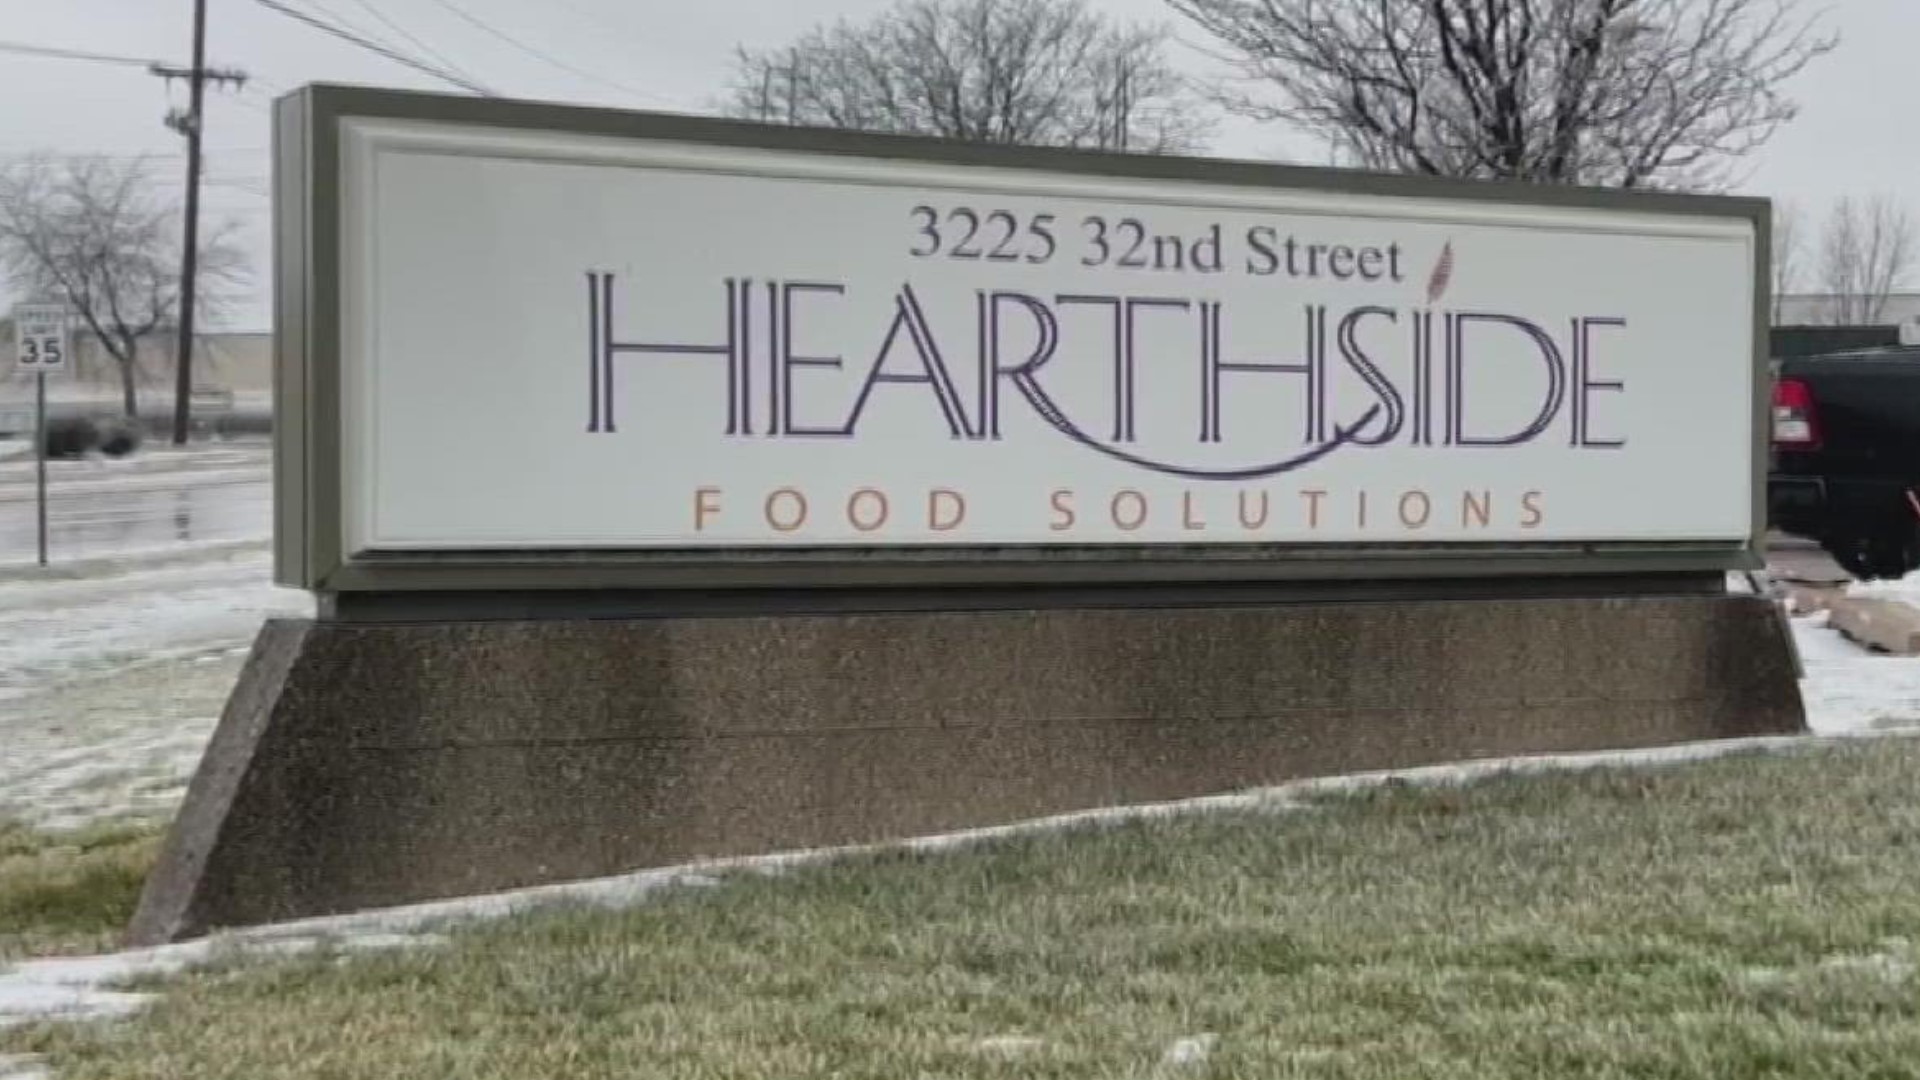 Hearthside Food Solutions in Kentwood is alleged to have knowingly hired children with false identities.